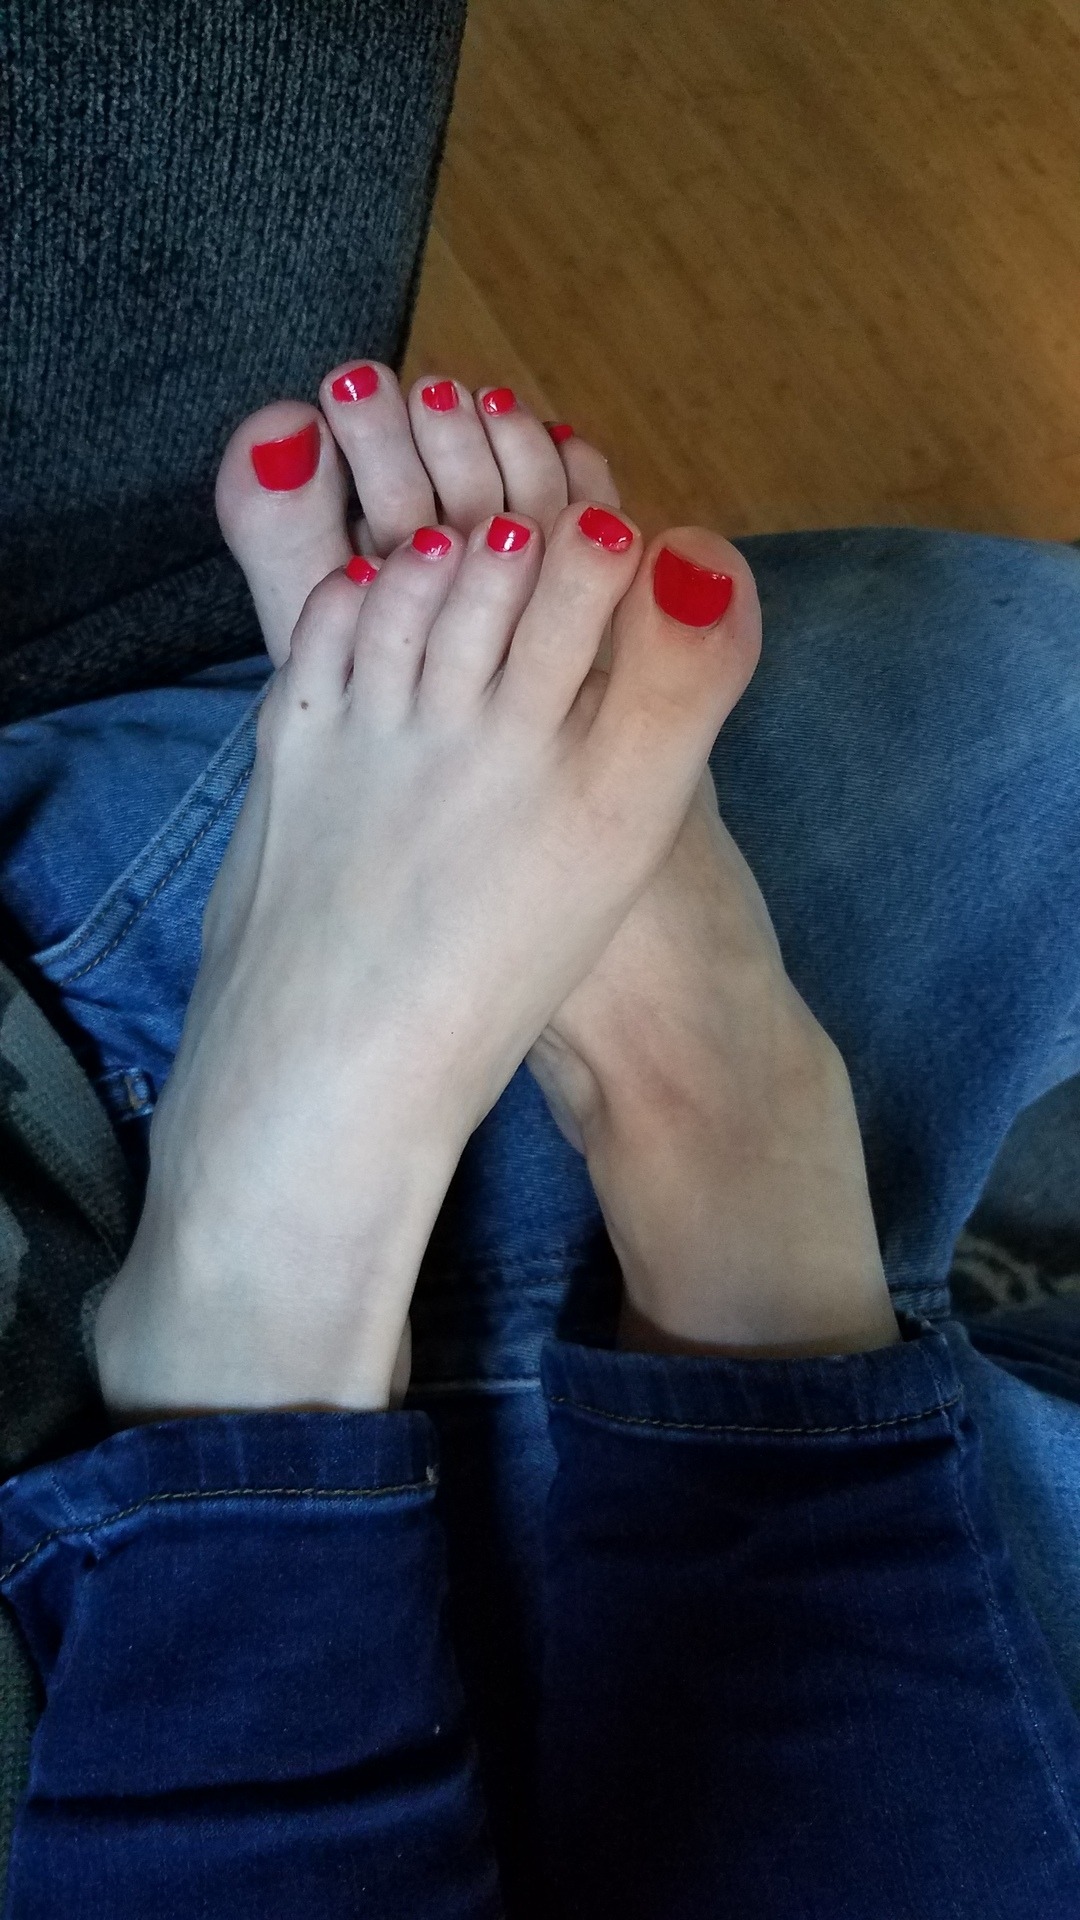 Candid,homemade and all original pics — My pretty wifes sexy feet in my lap getting some...